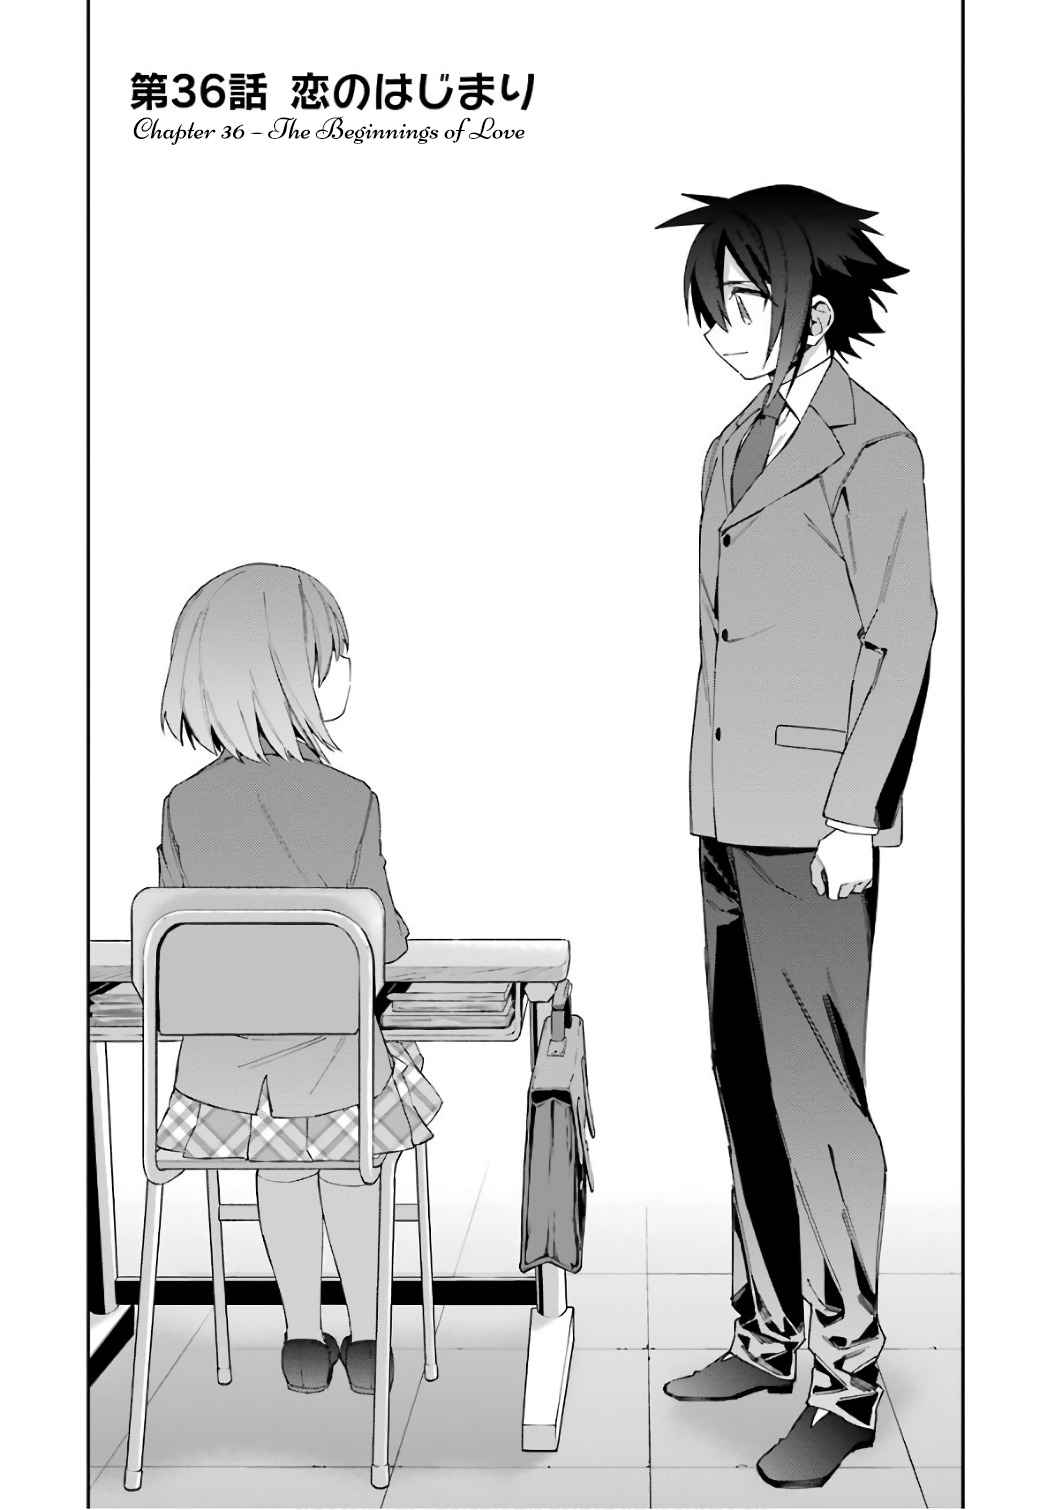 High School Prodigies Have It Easy Even In Another World! Vol. 5 Ch. 36 The Beginnings of Love